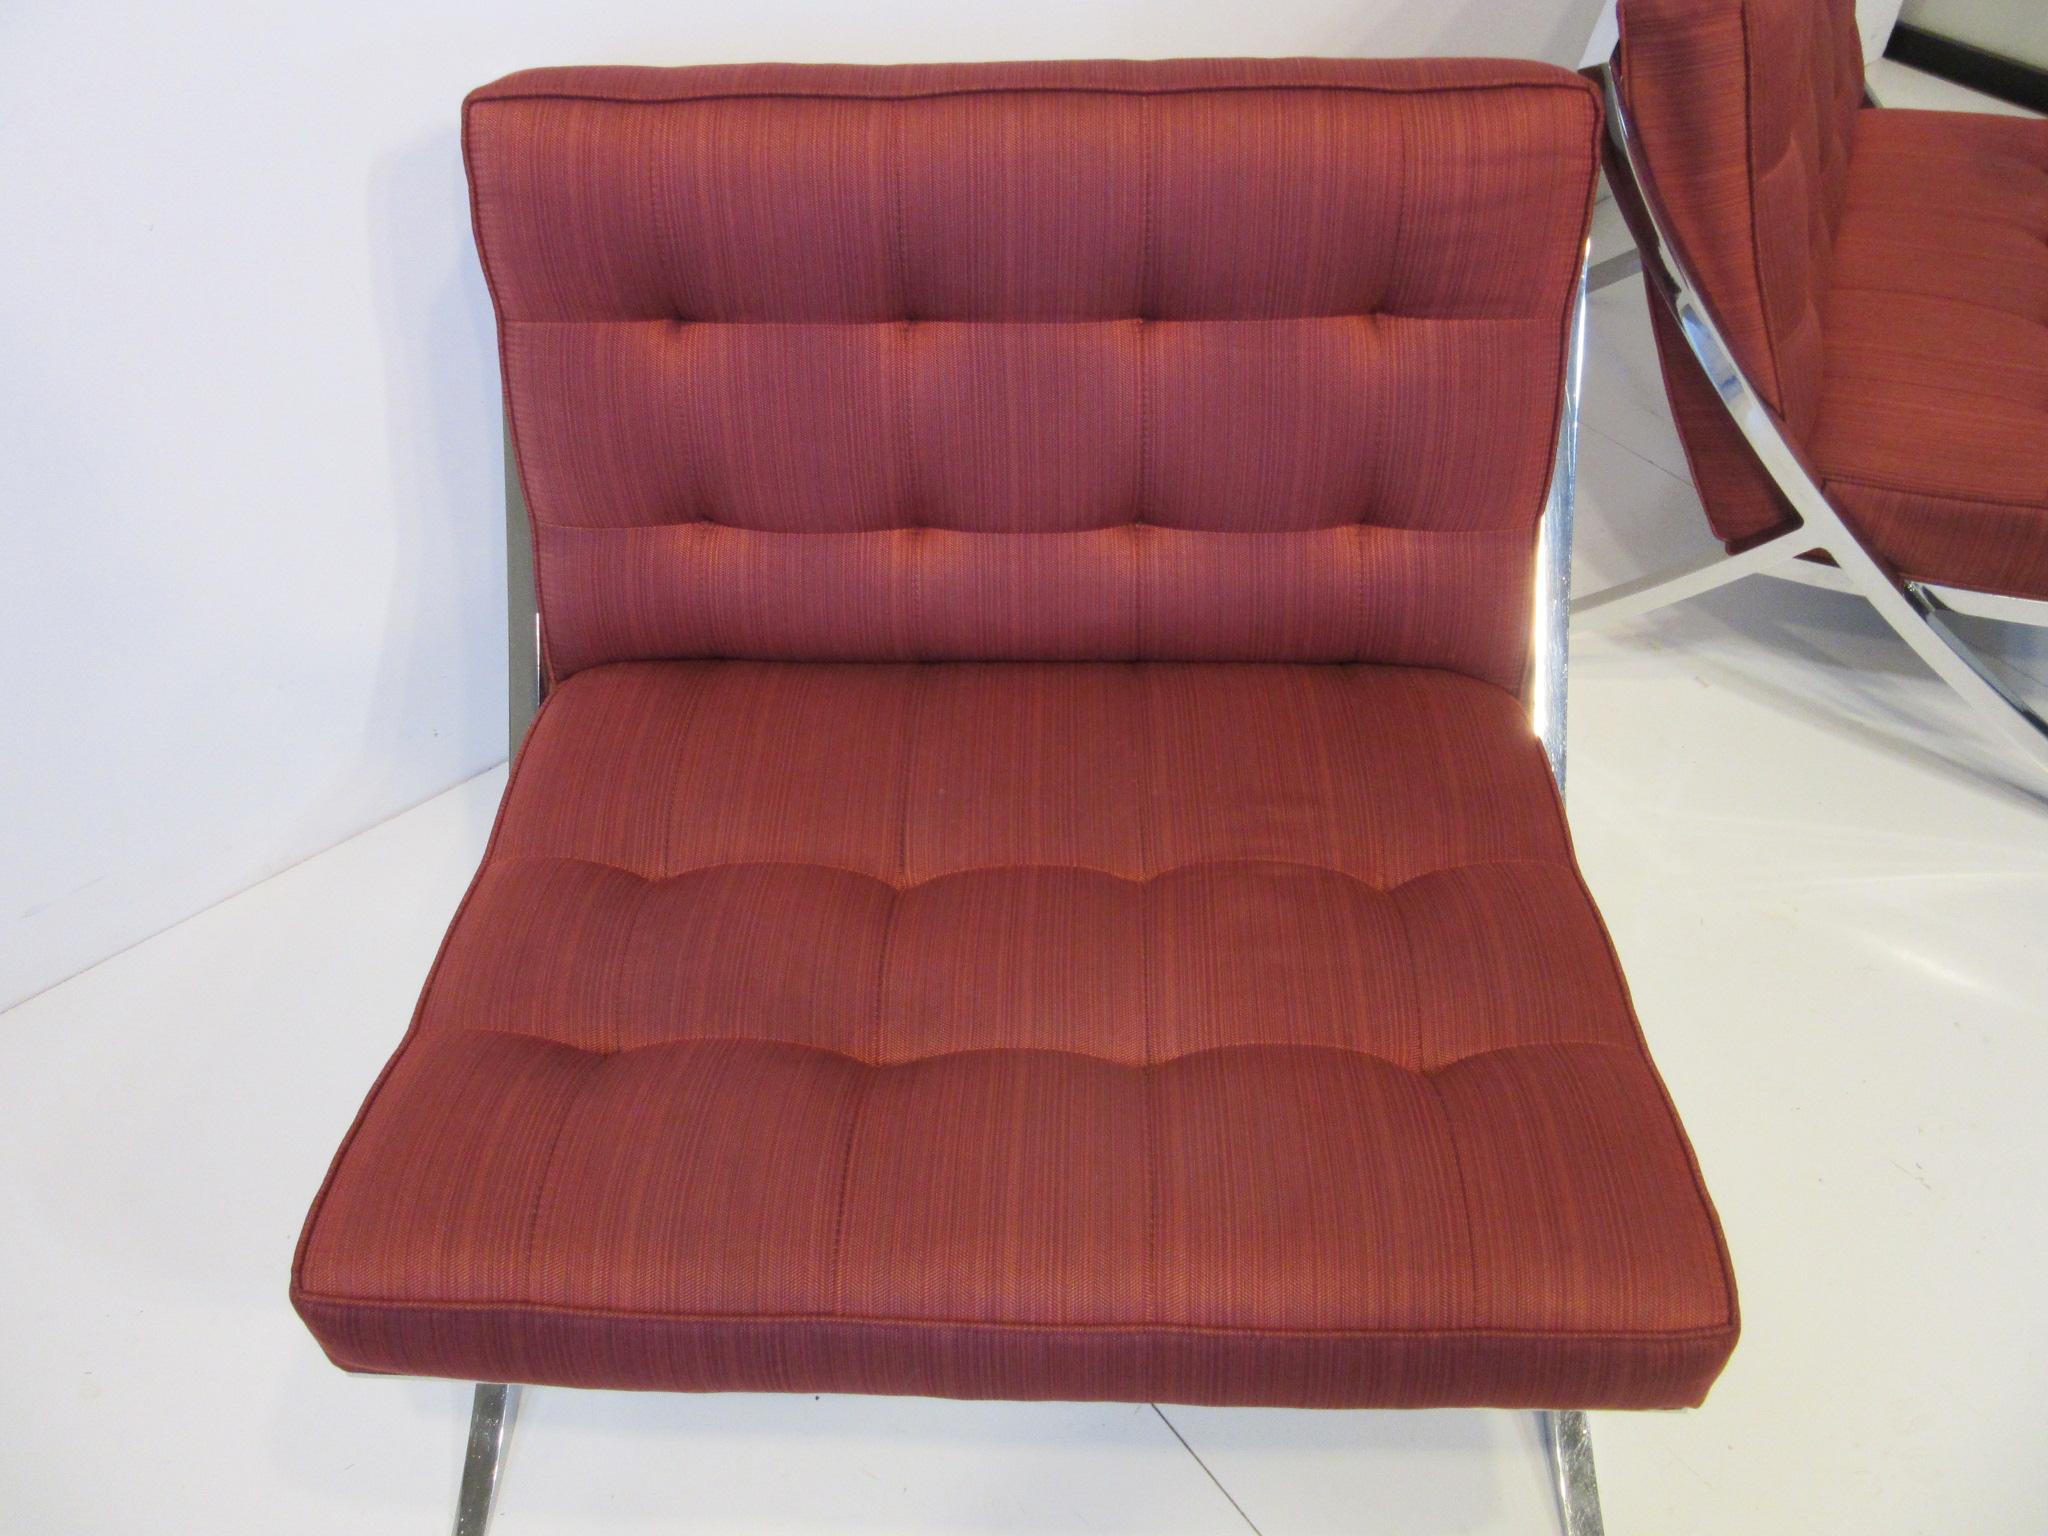 1970 Chromed Upholstered Saber Leg Lounge Chairs in a Knoll Barcelona Style   1